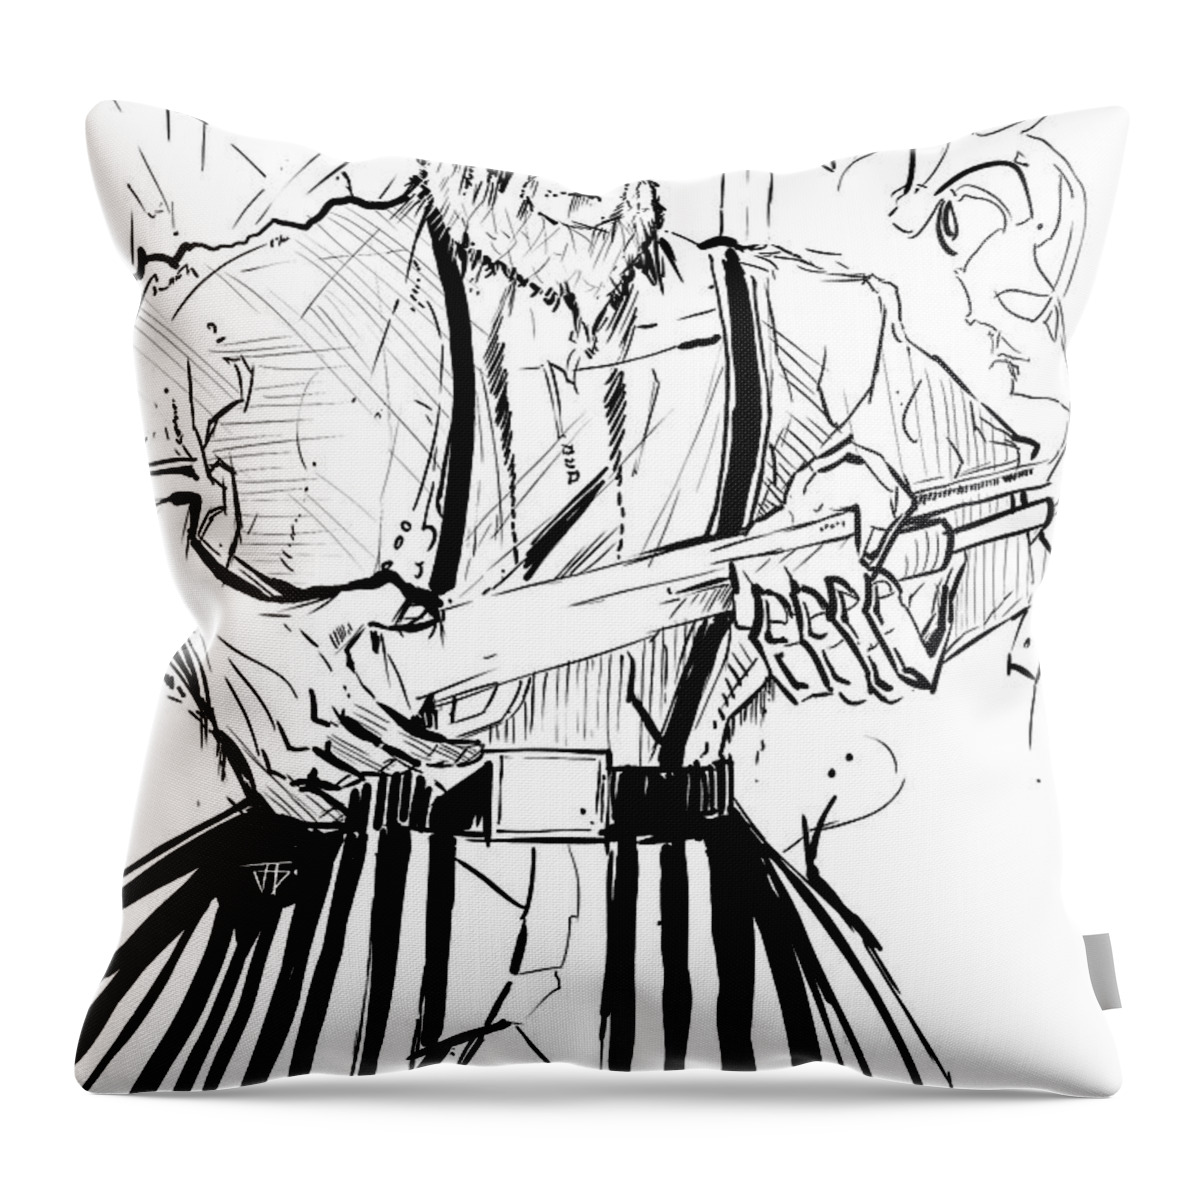 Fire Beard Ink Throw Pillow featuring the painting Bearded Bullets Ink by John Gholson